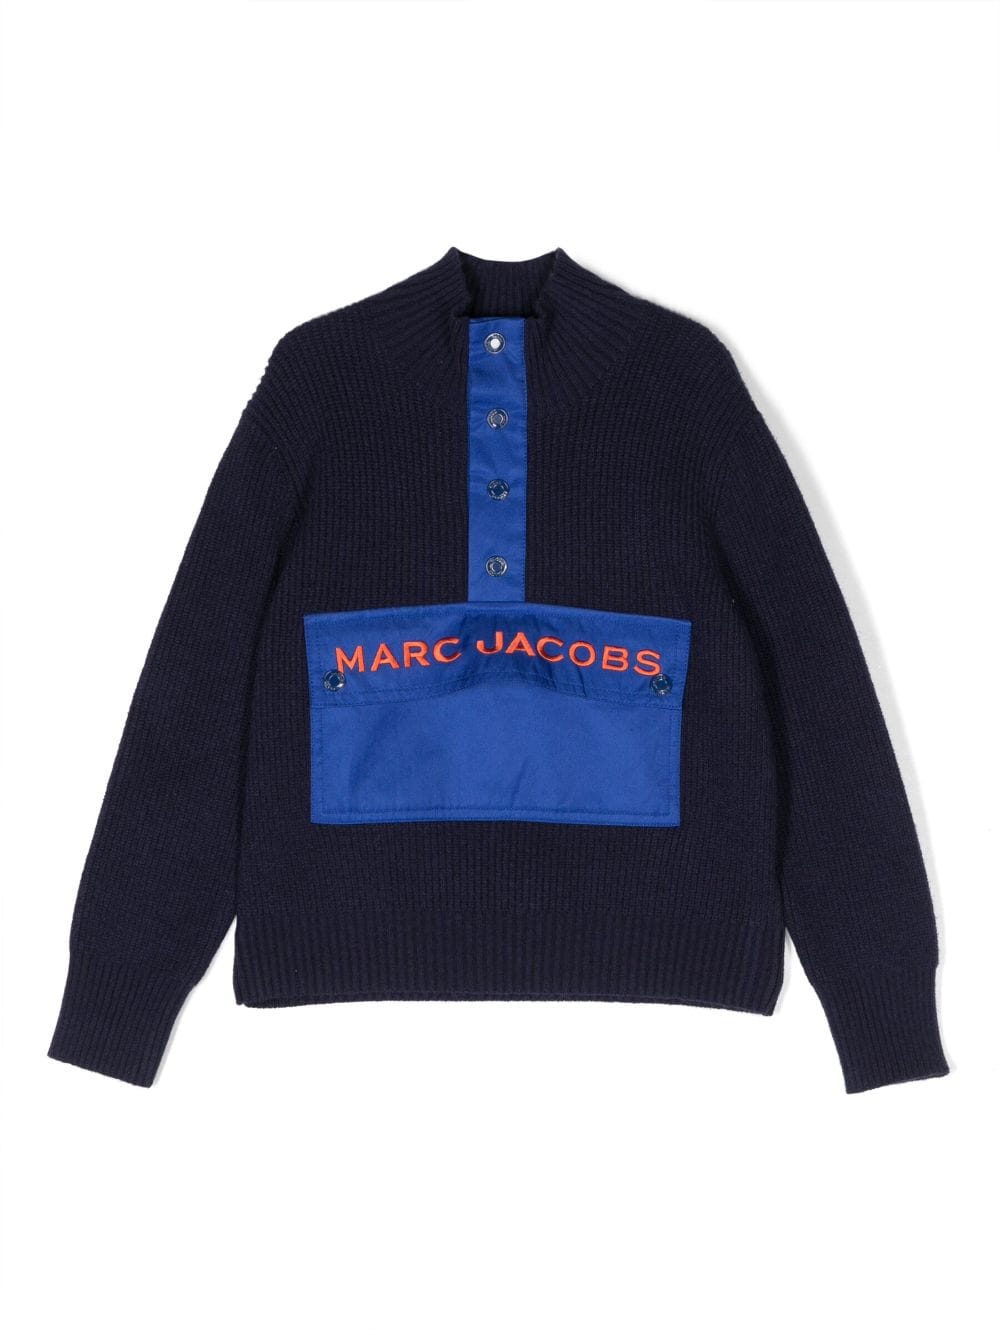 Marc Jacobs Kids' Viscose Blend Knit Sweater In Navy